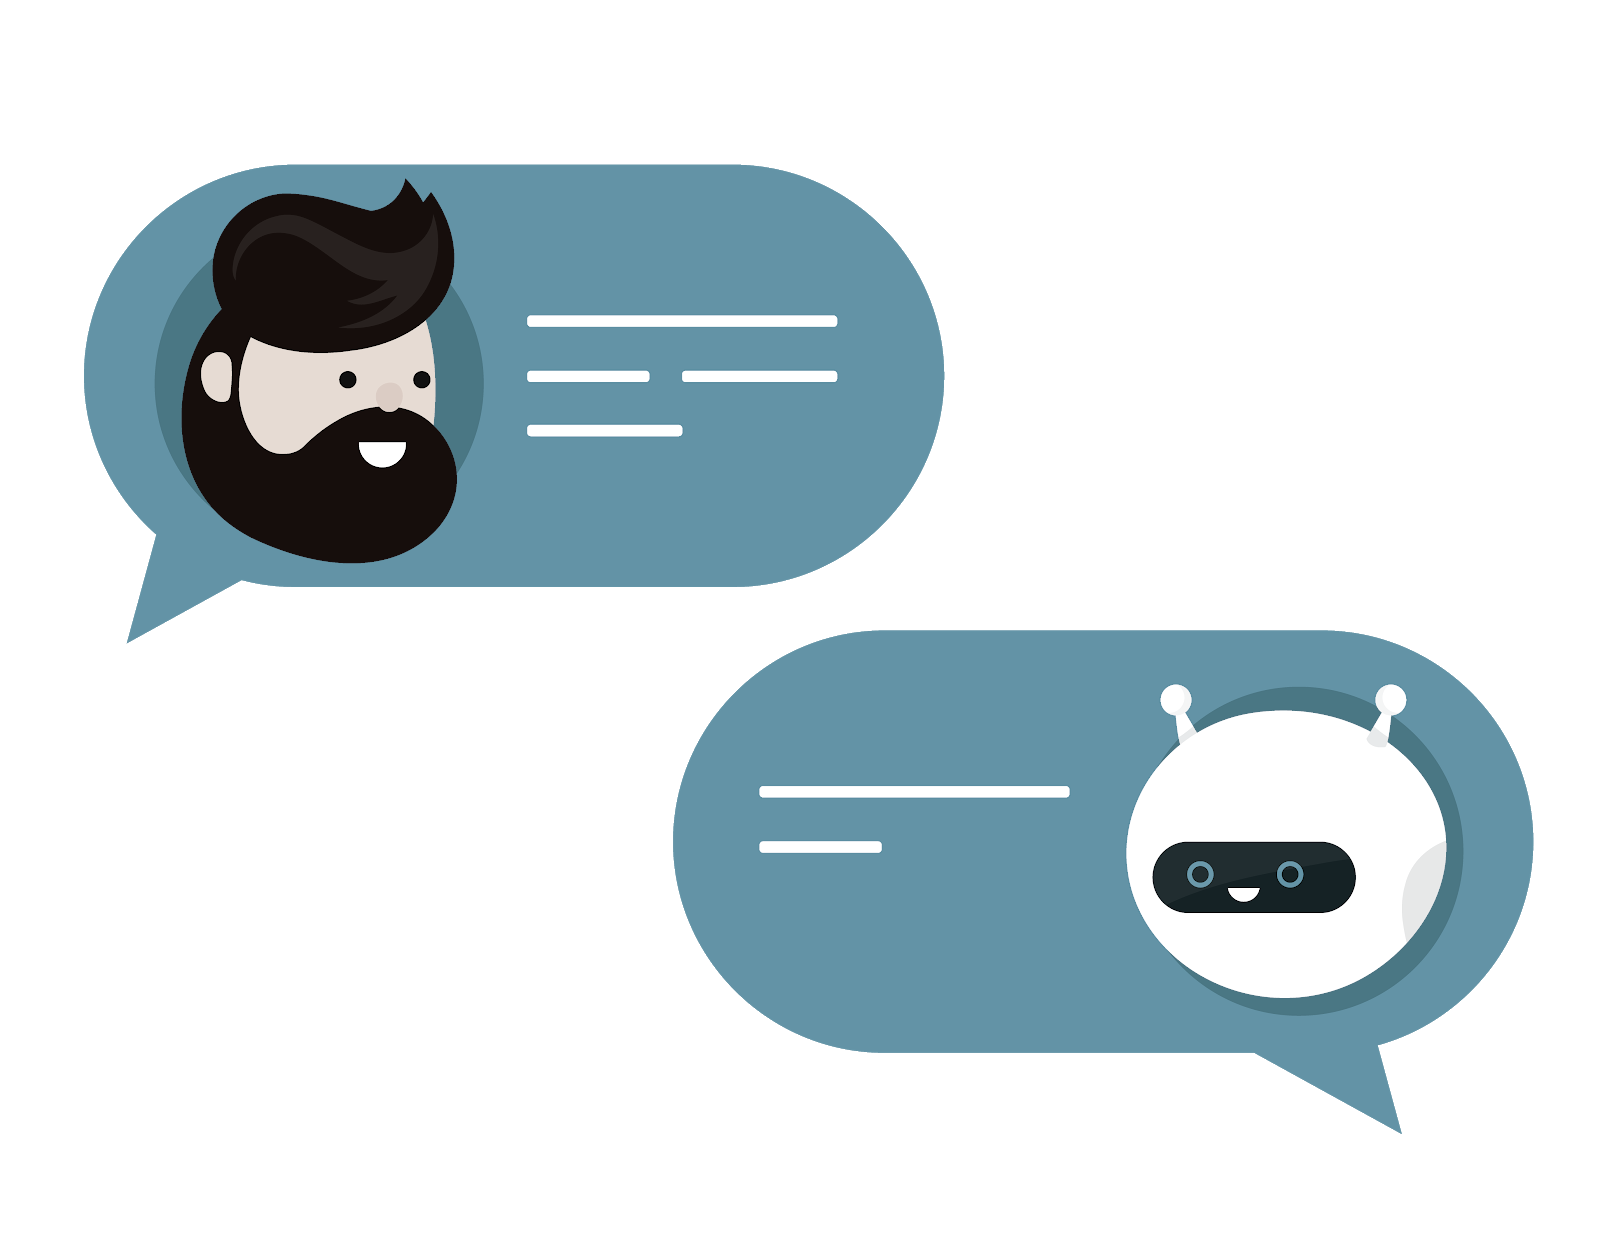 Chatbots: The Past, Present, And Future